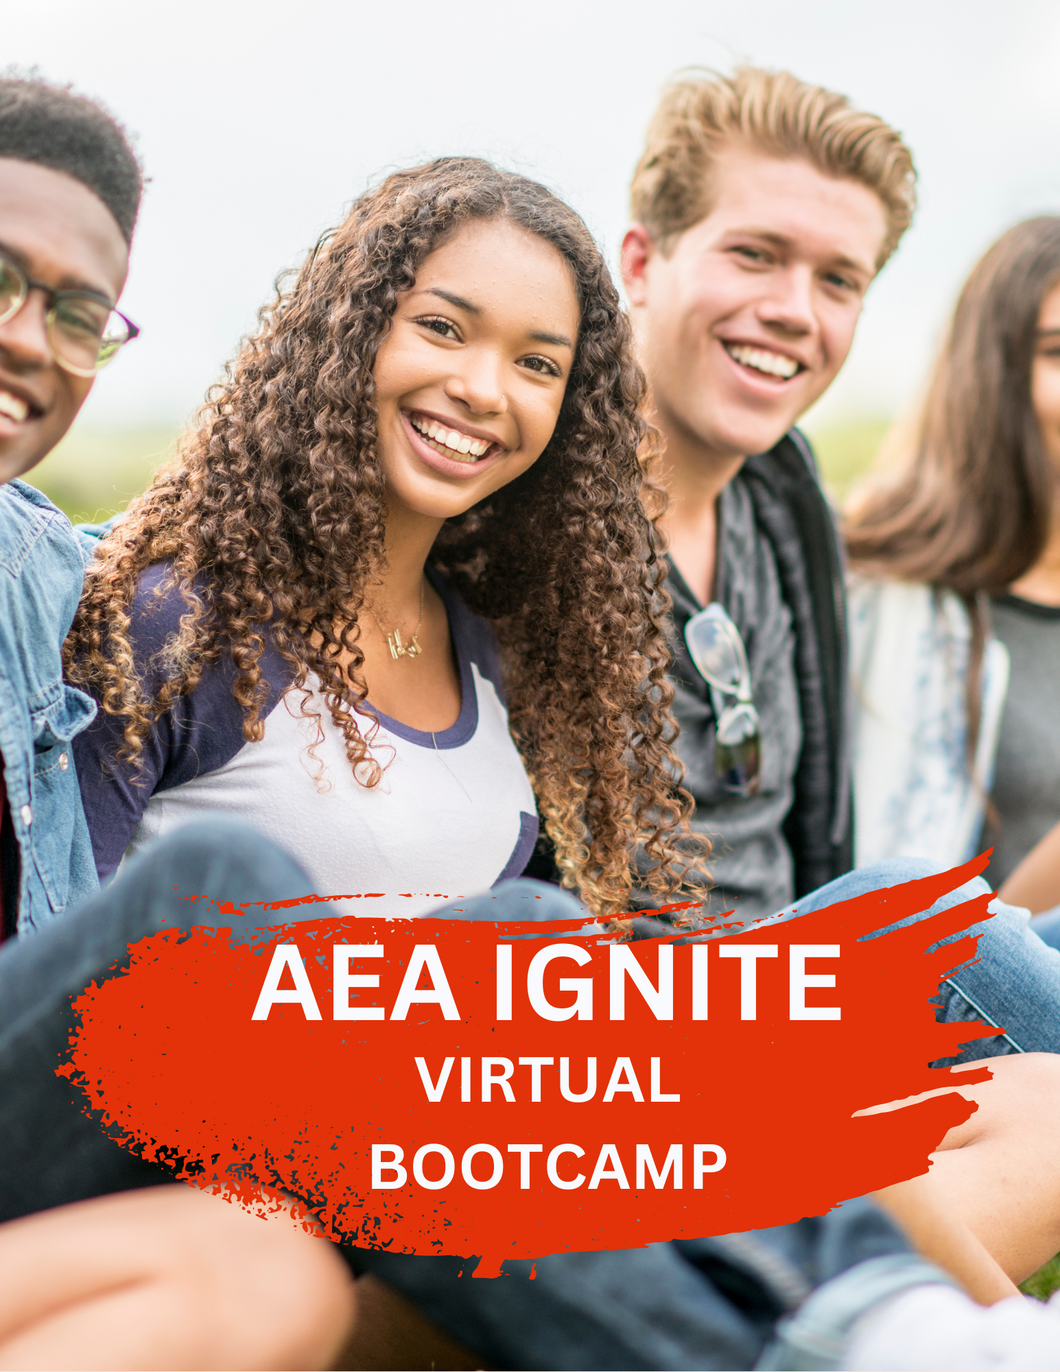 IGNITE Bootcamp - Designed for Teens and Young Adults